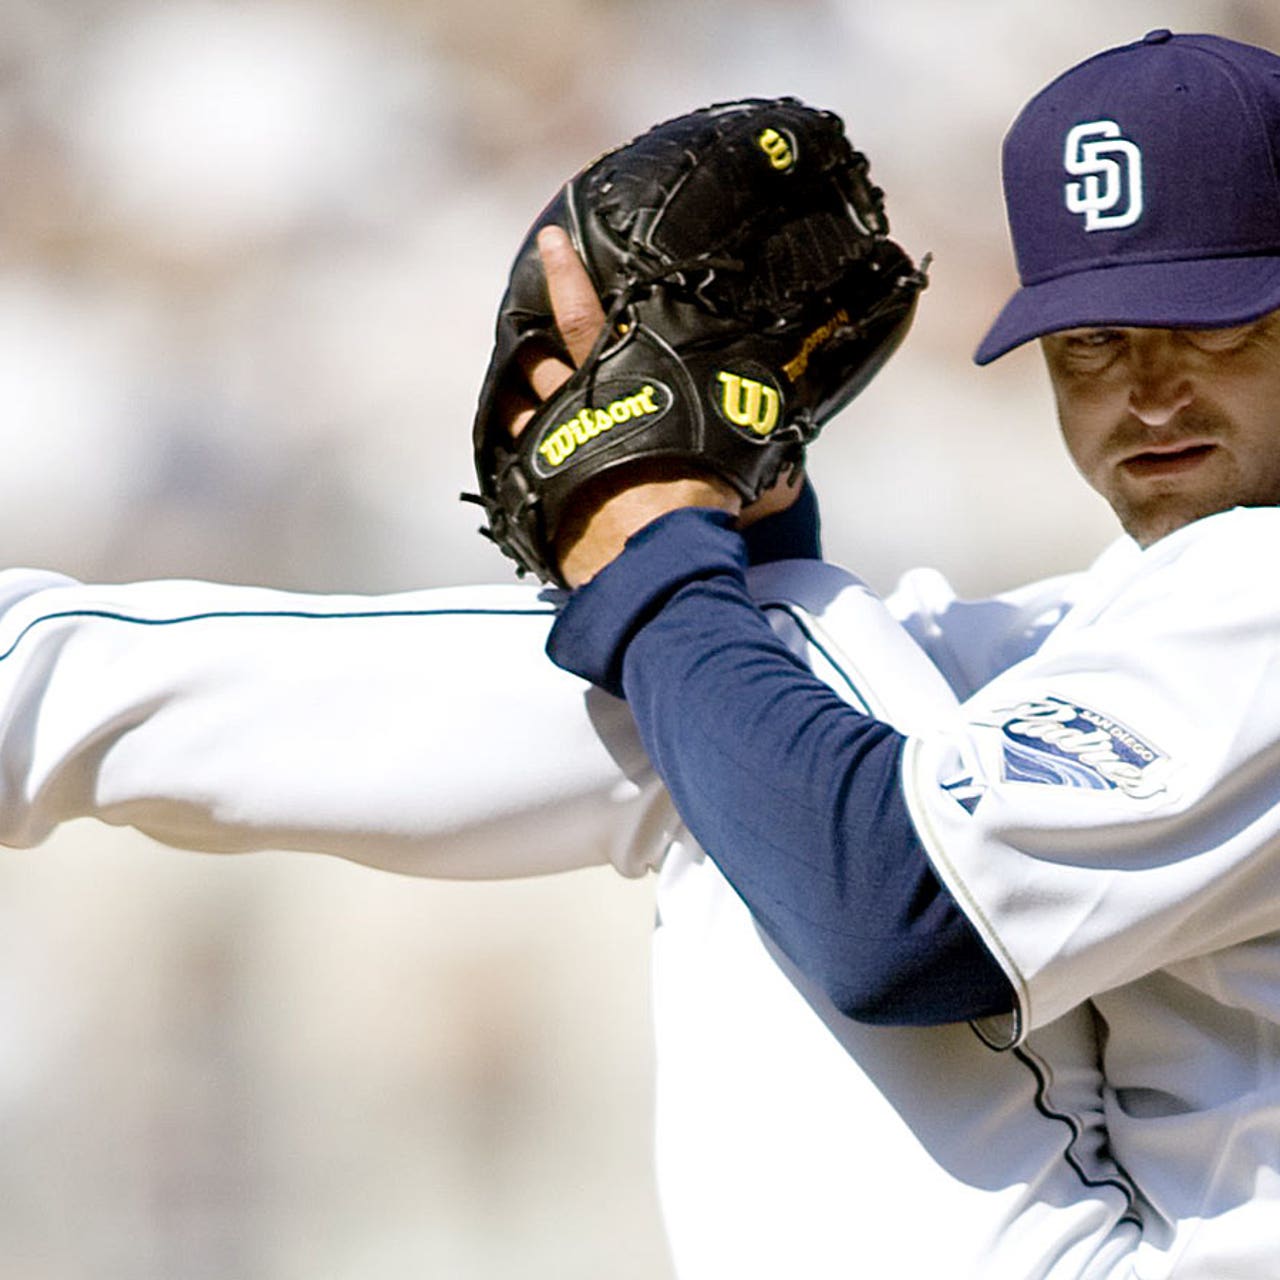 Trevor Hoffman's Place in the Top 10 Greatest Closers in MLB